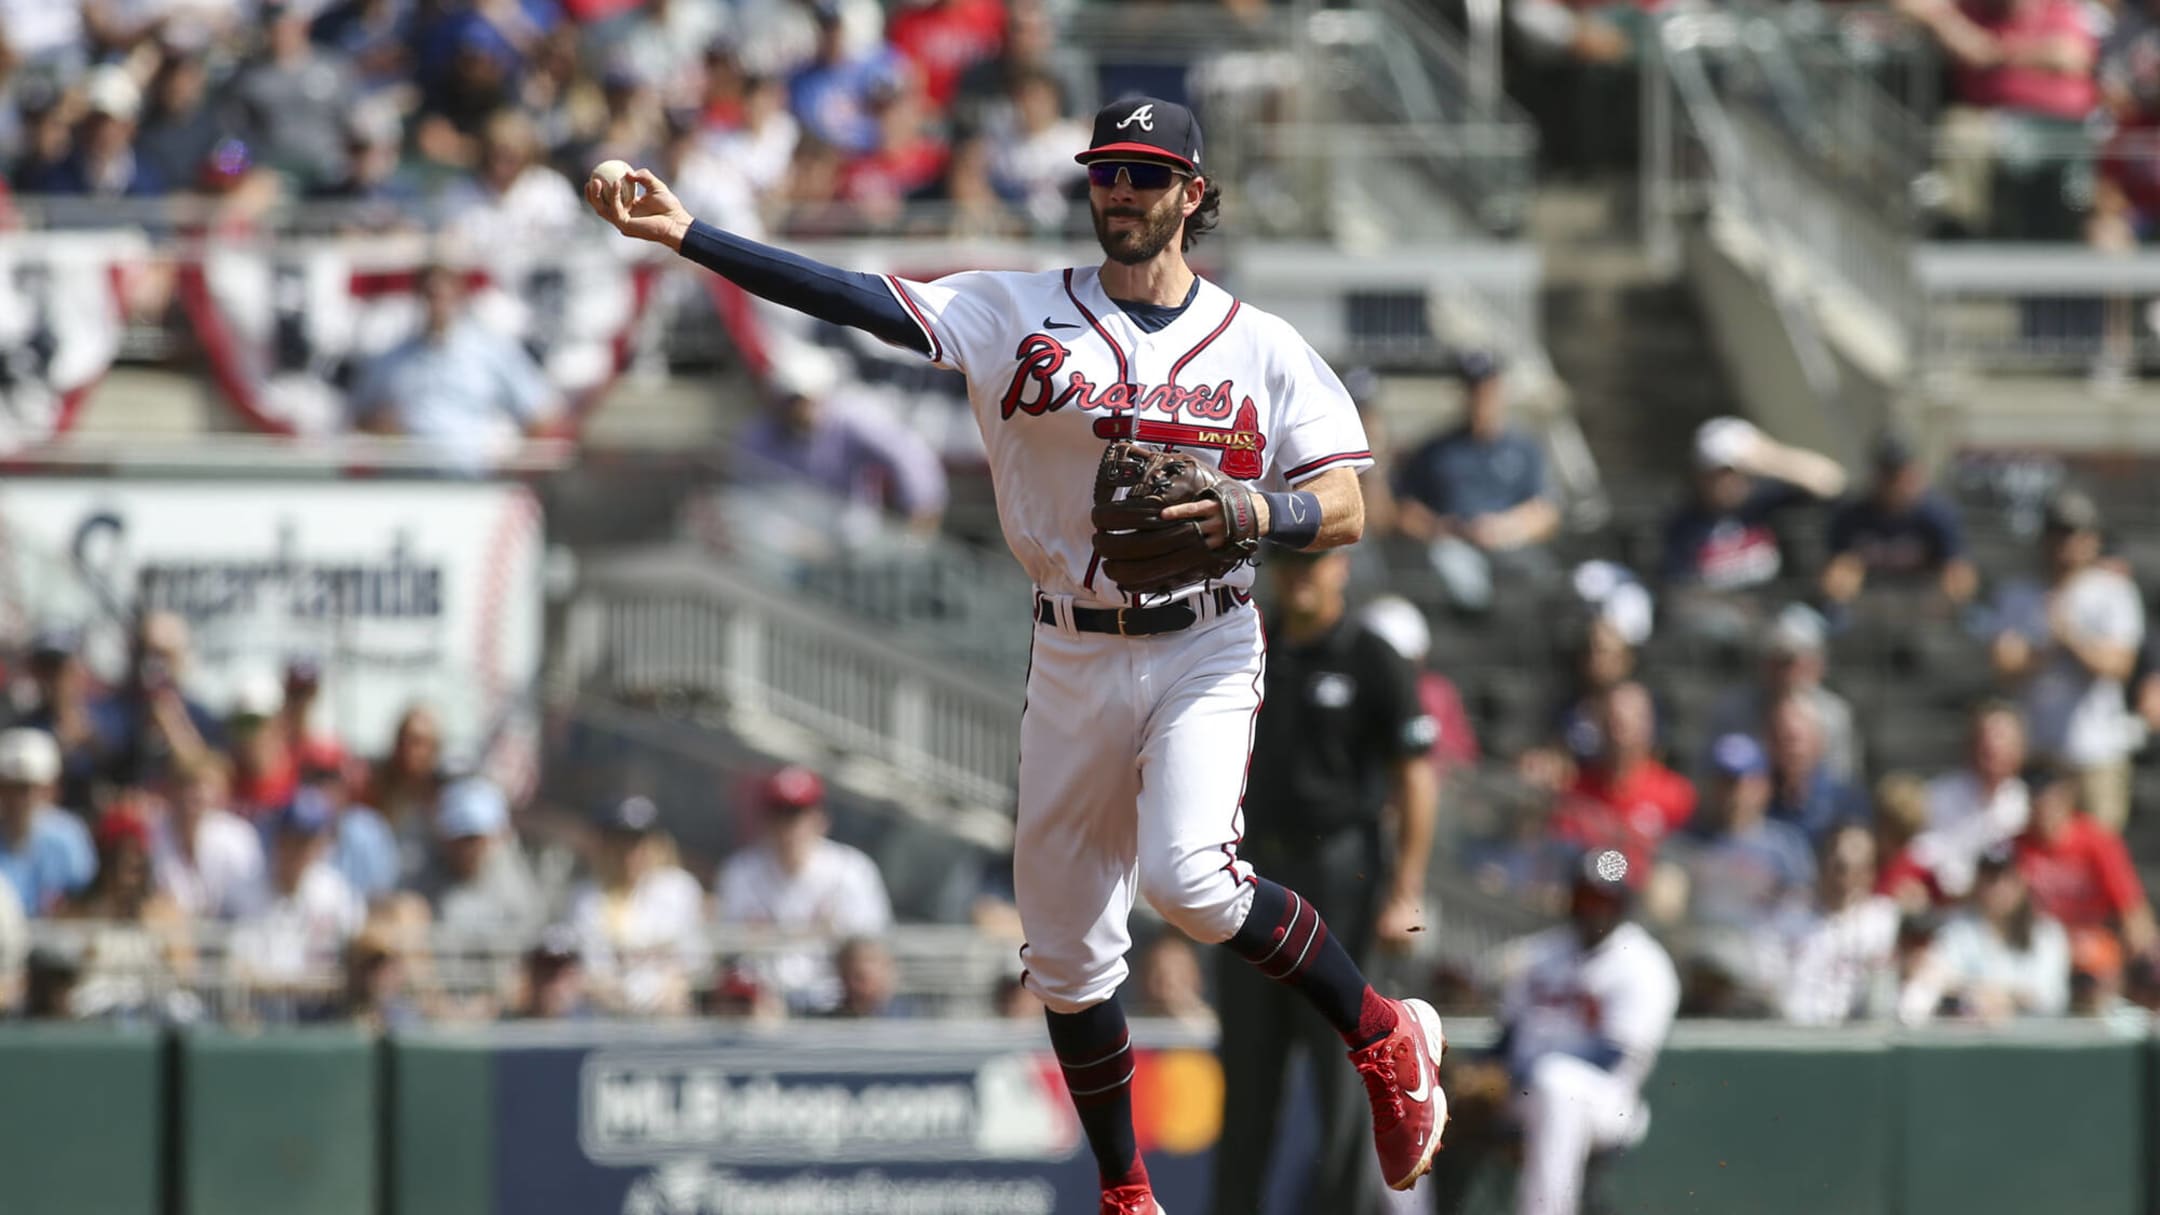 Photos: Chicago Cubs introduce new shortstop Dansby Swanson